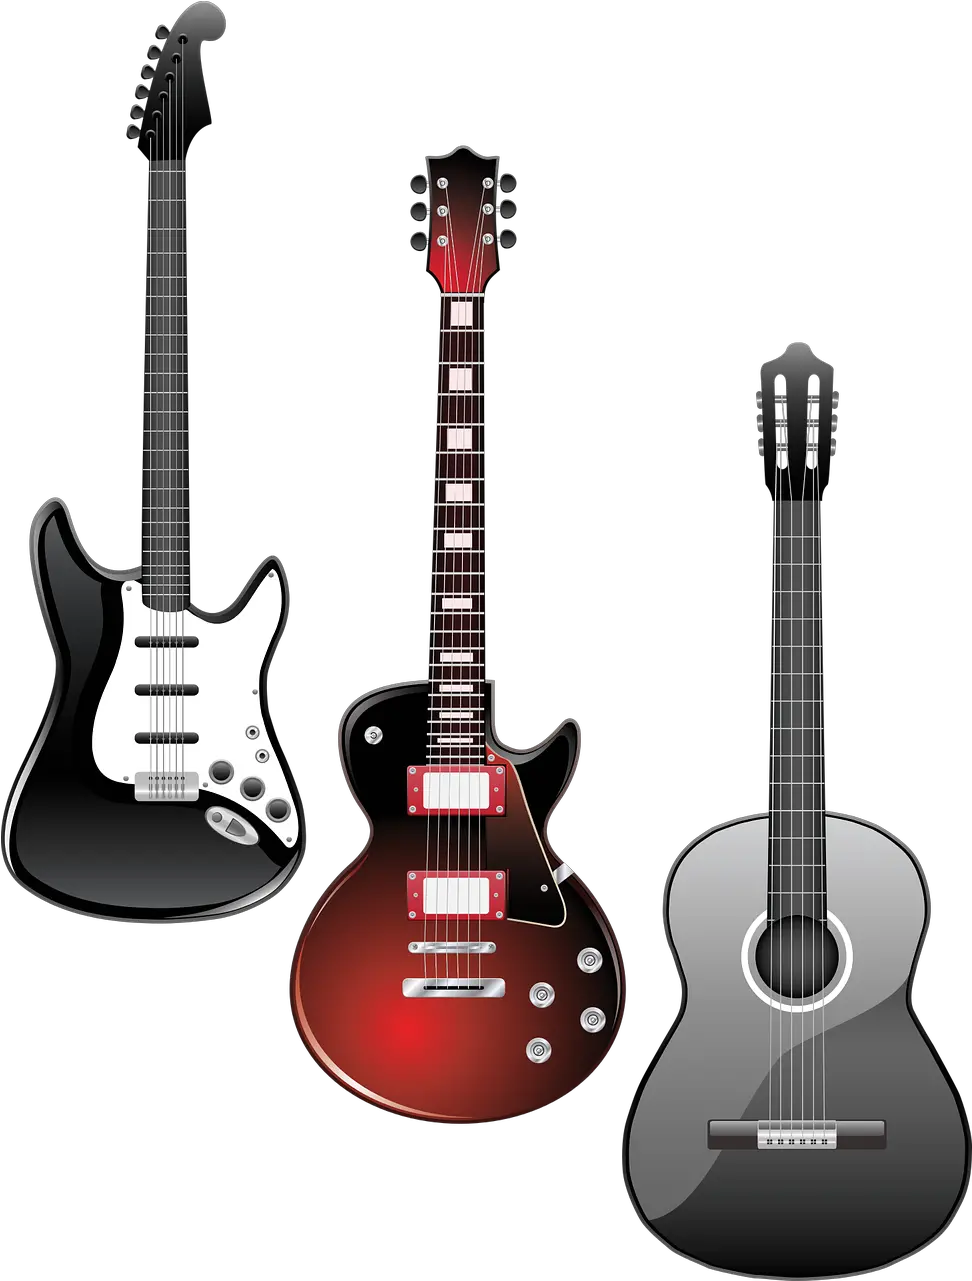 Guitar Musical Instrument Free Vector Graphic On Pixabay Guitar Images For Editing Png Instruments Png